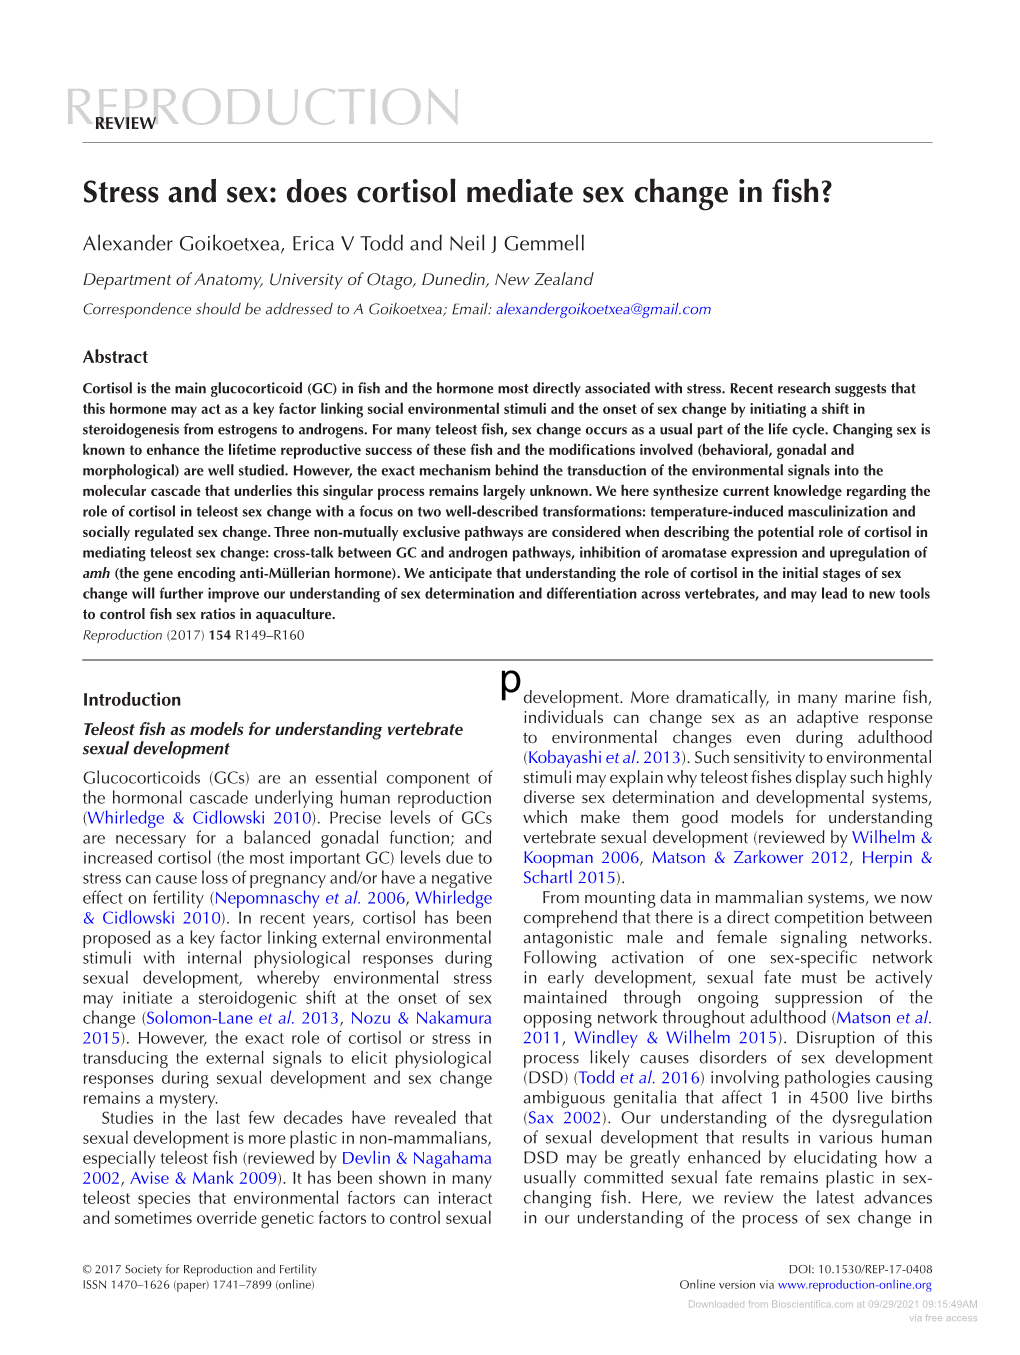 Stress and Sex: Does Cortisol Mediate Sex Change in Fish?